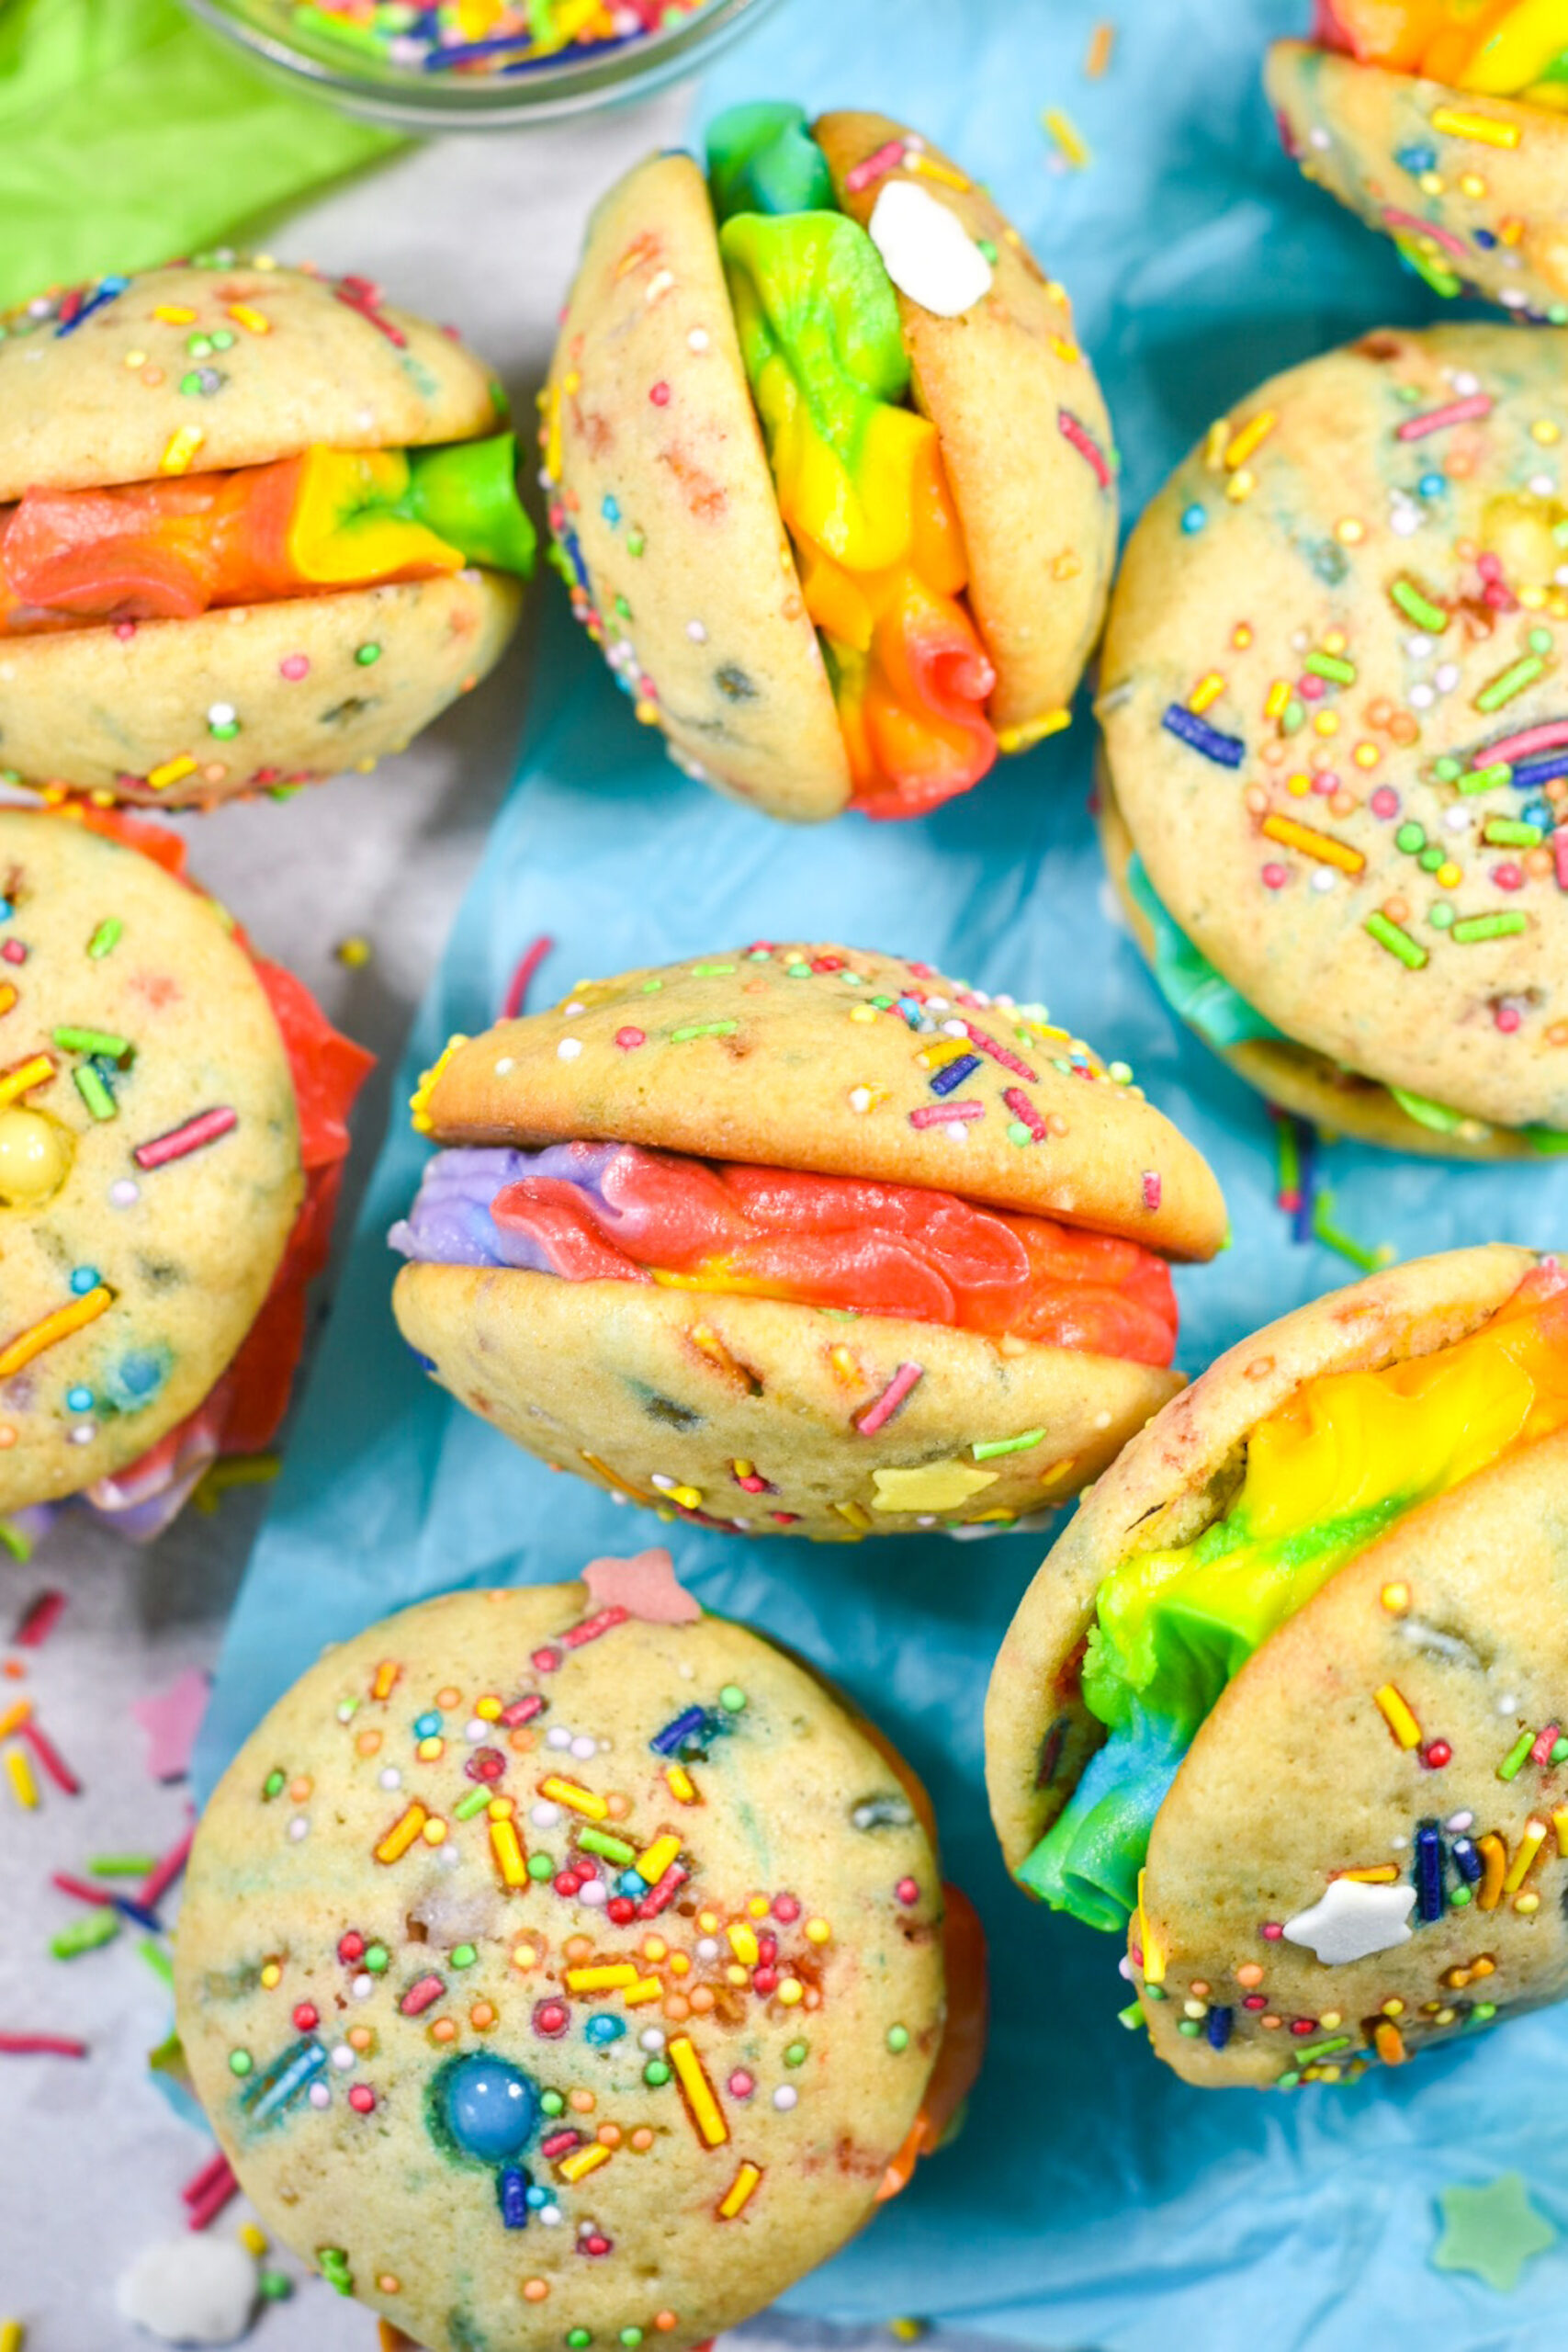 Rainbow Whoopie Pies on a sheet of blue tissue